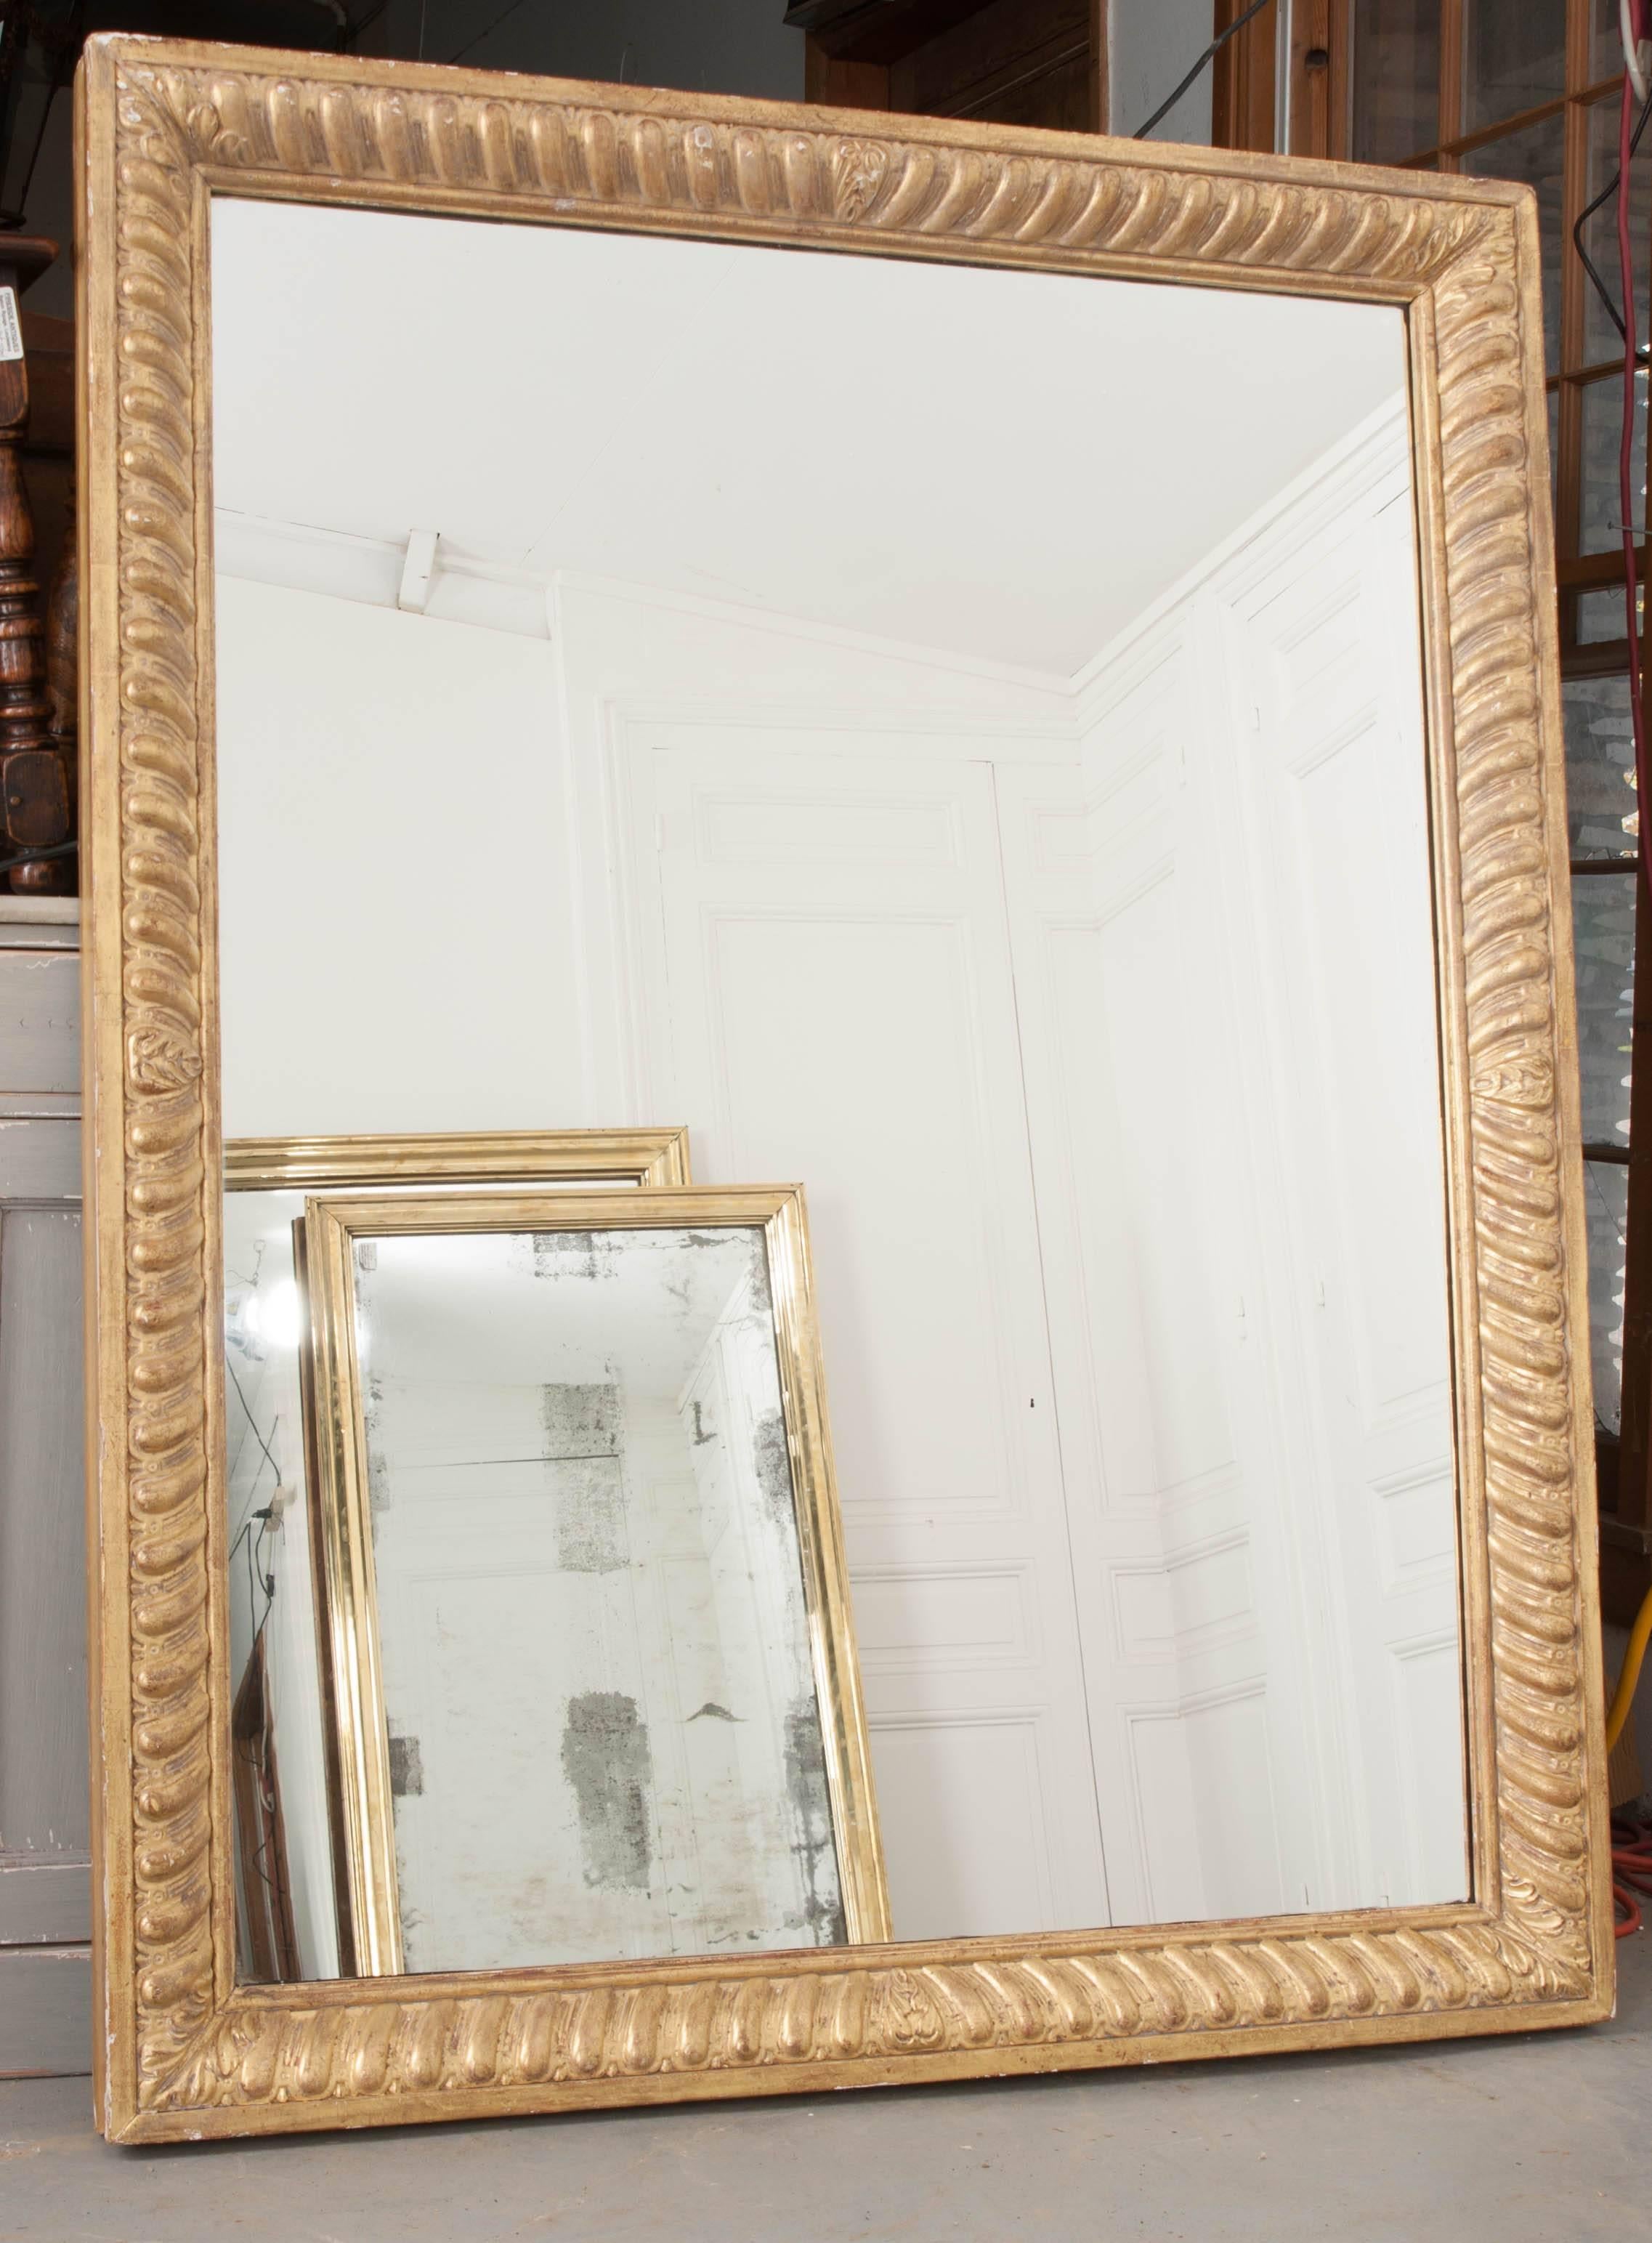 A size-able gold gilt wall mirror from France, circa 1880. This wonderful antique has a gilt frame styled with a mirrored, or book-matched motif done in a classic styling. The gold gilt is in wonderful antique condition, with brilliant color and